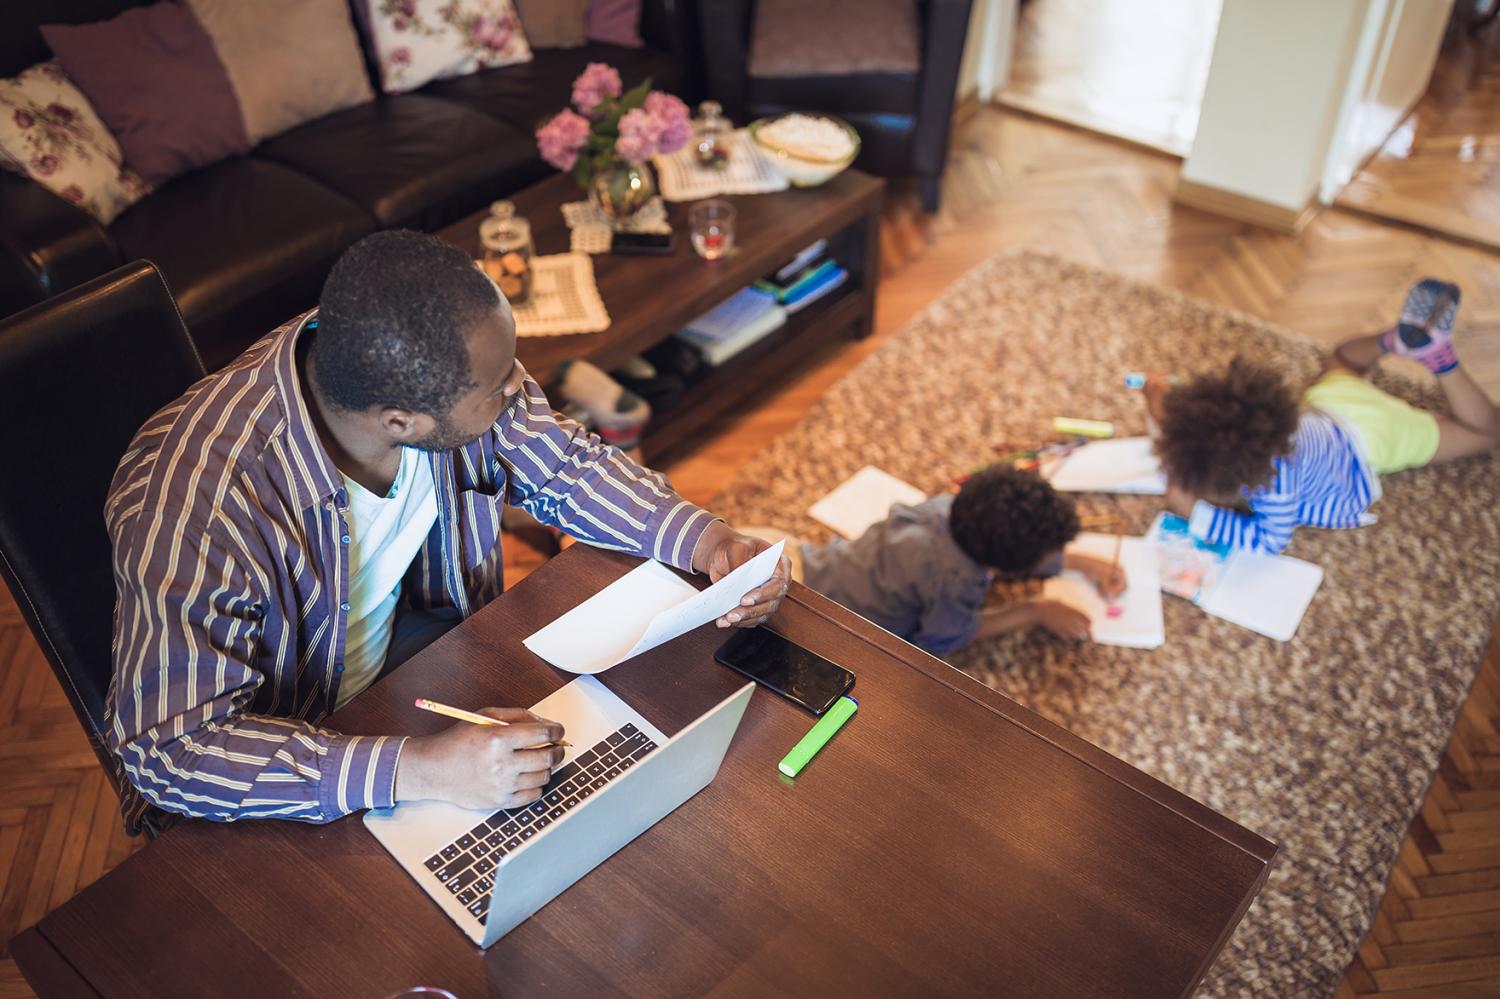 Man on computer with kids